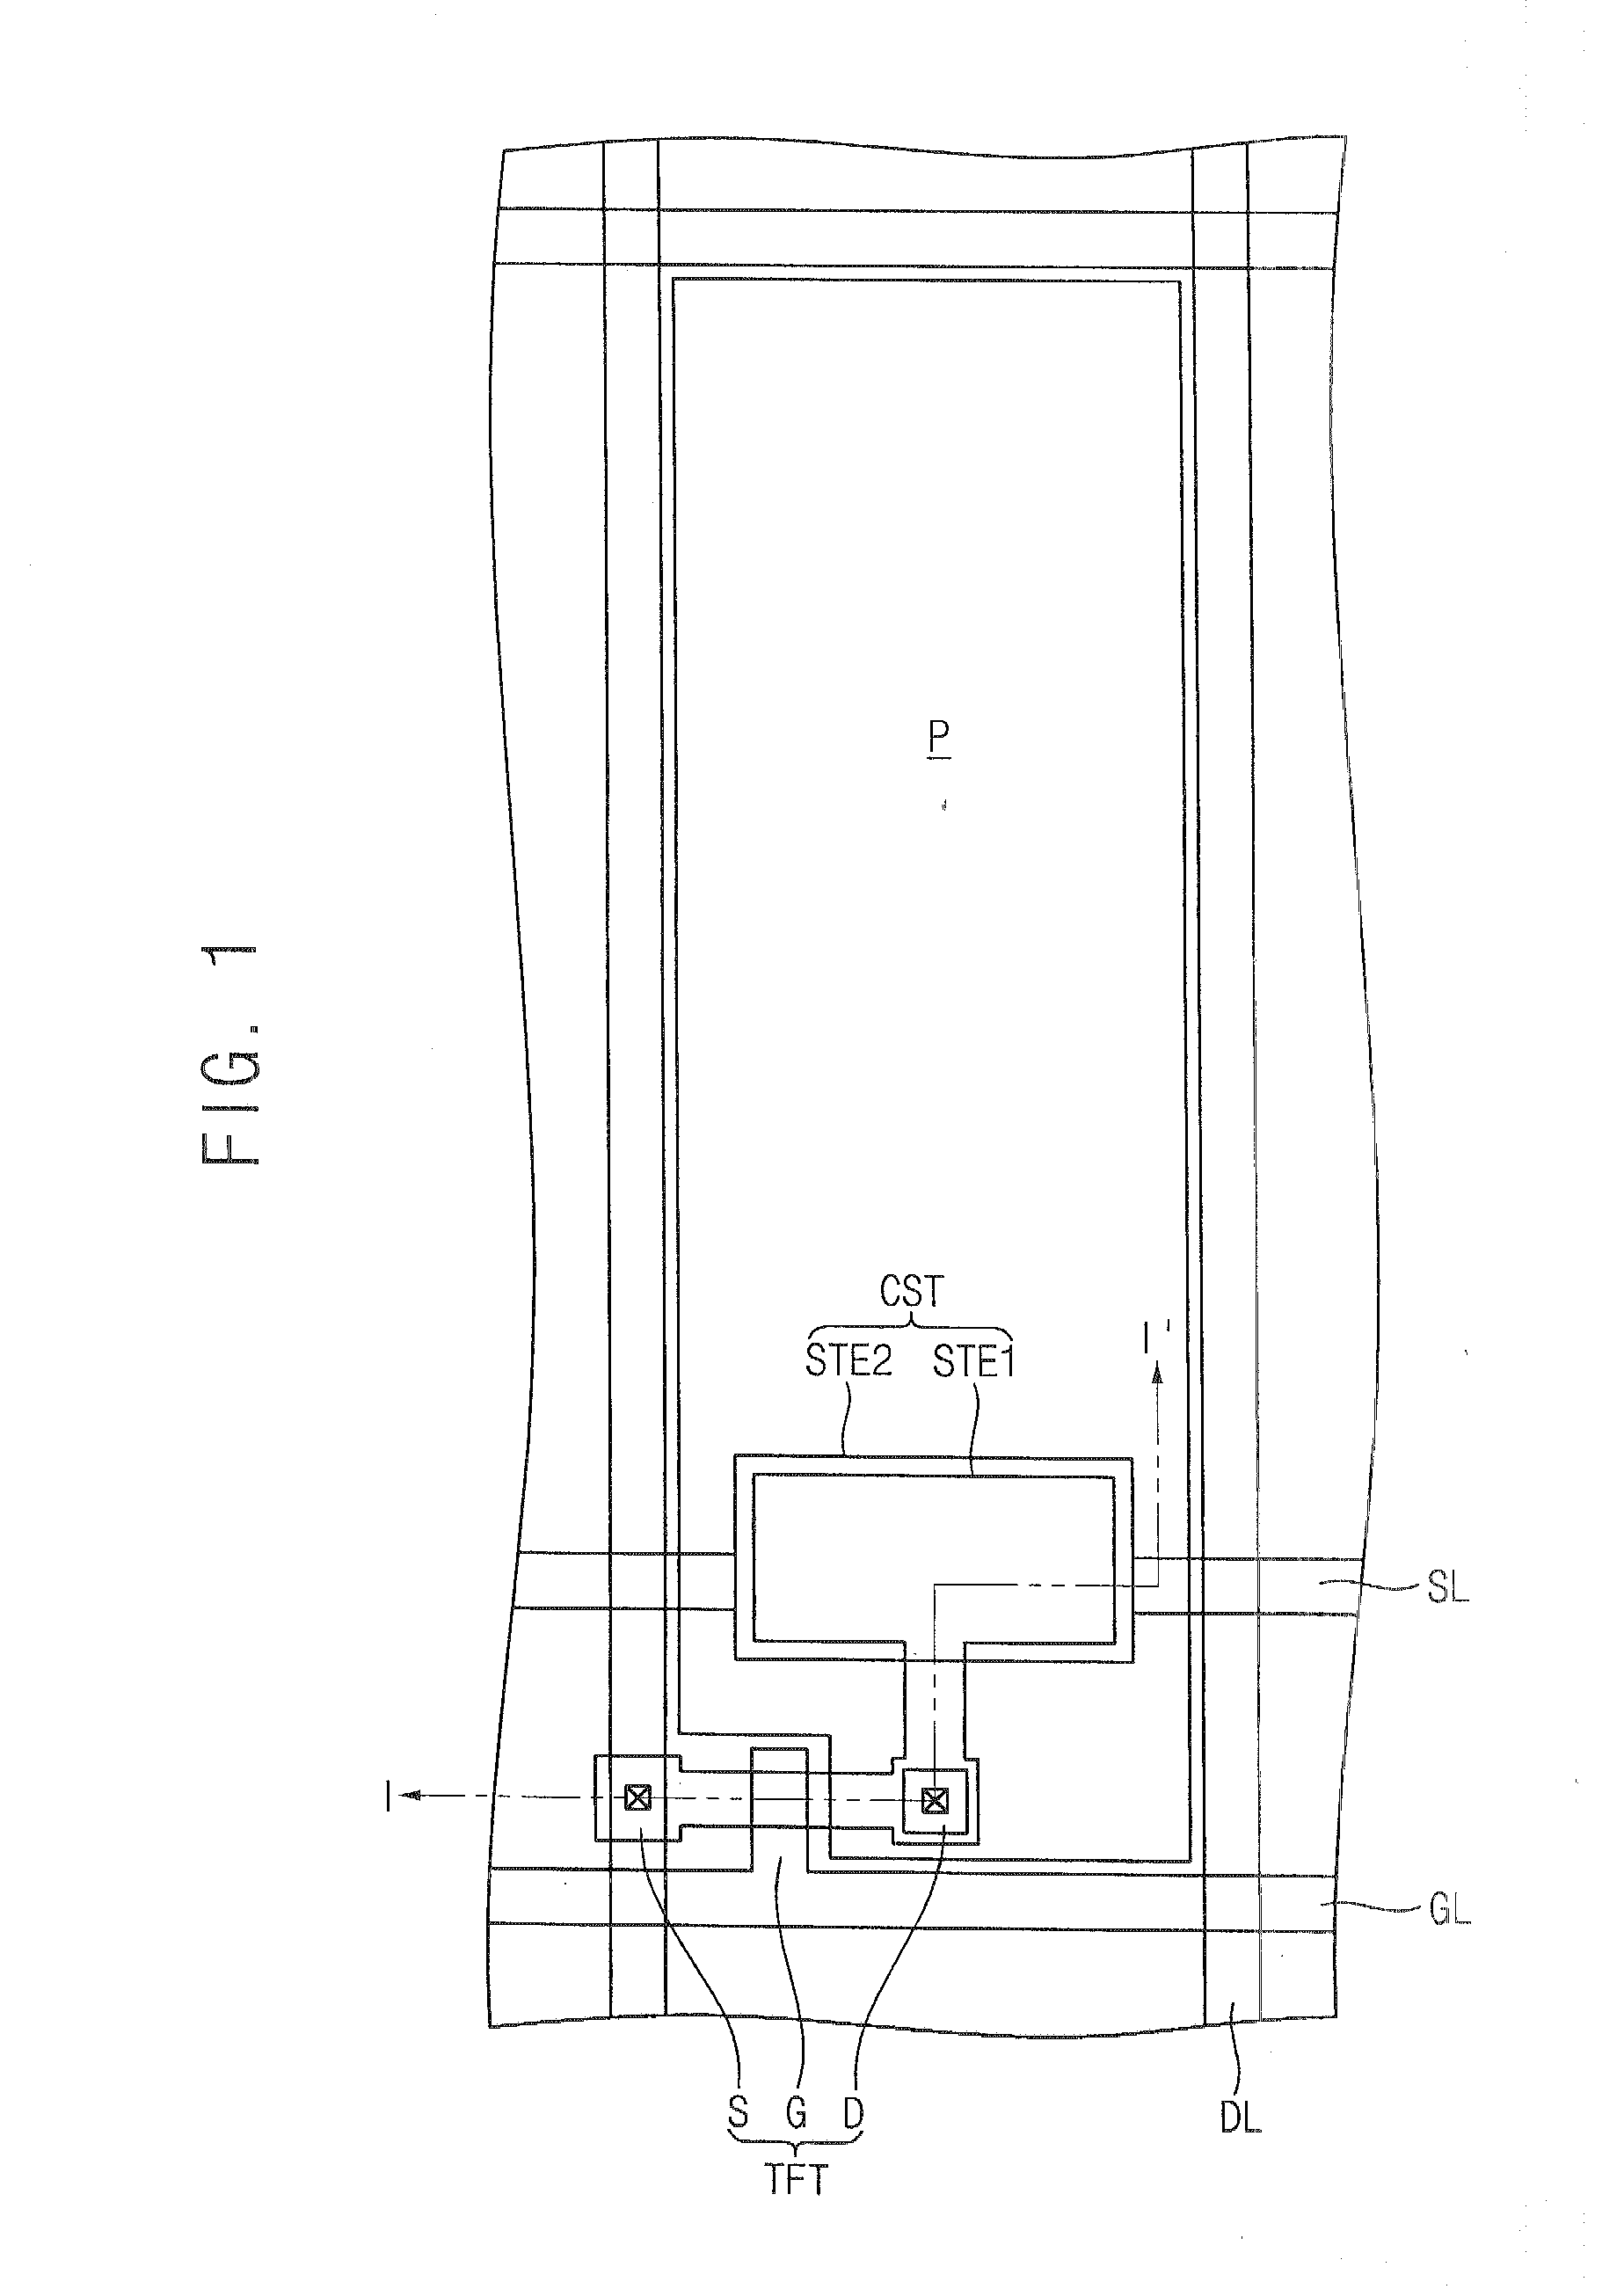 Display substrate, method of manufacturing the same and display apparatus having the same